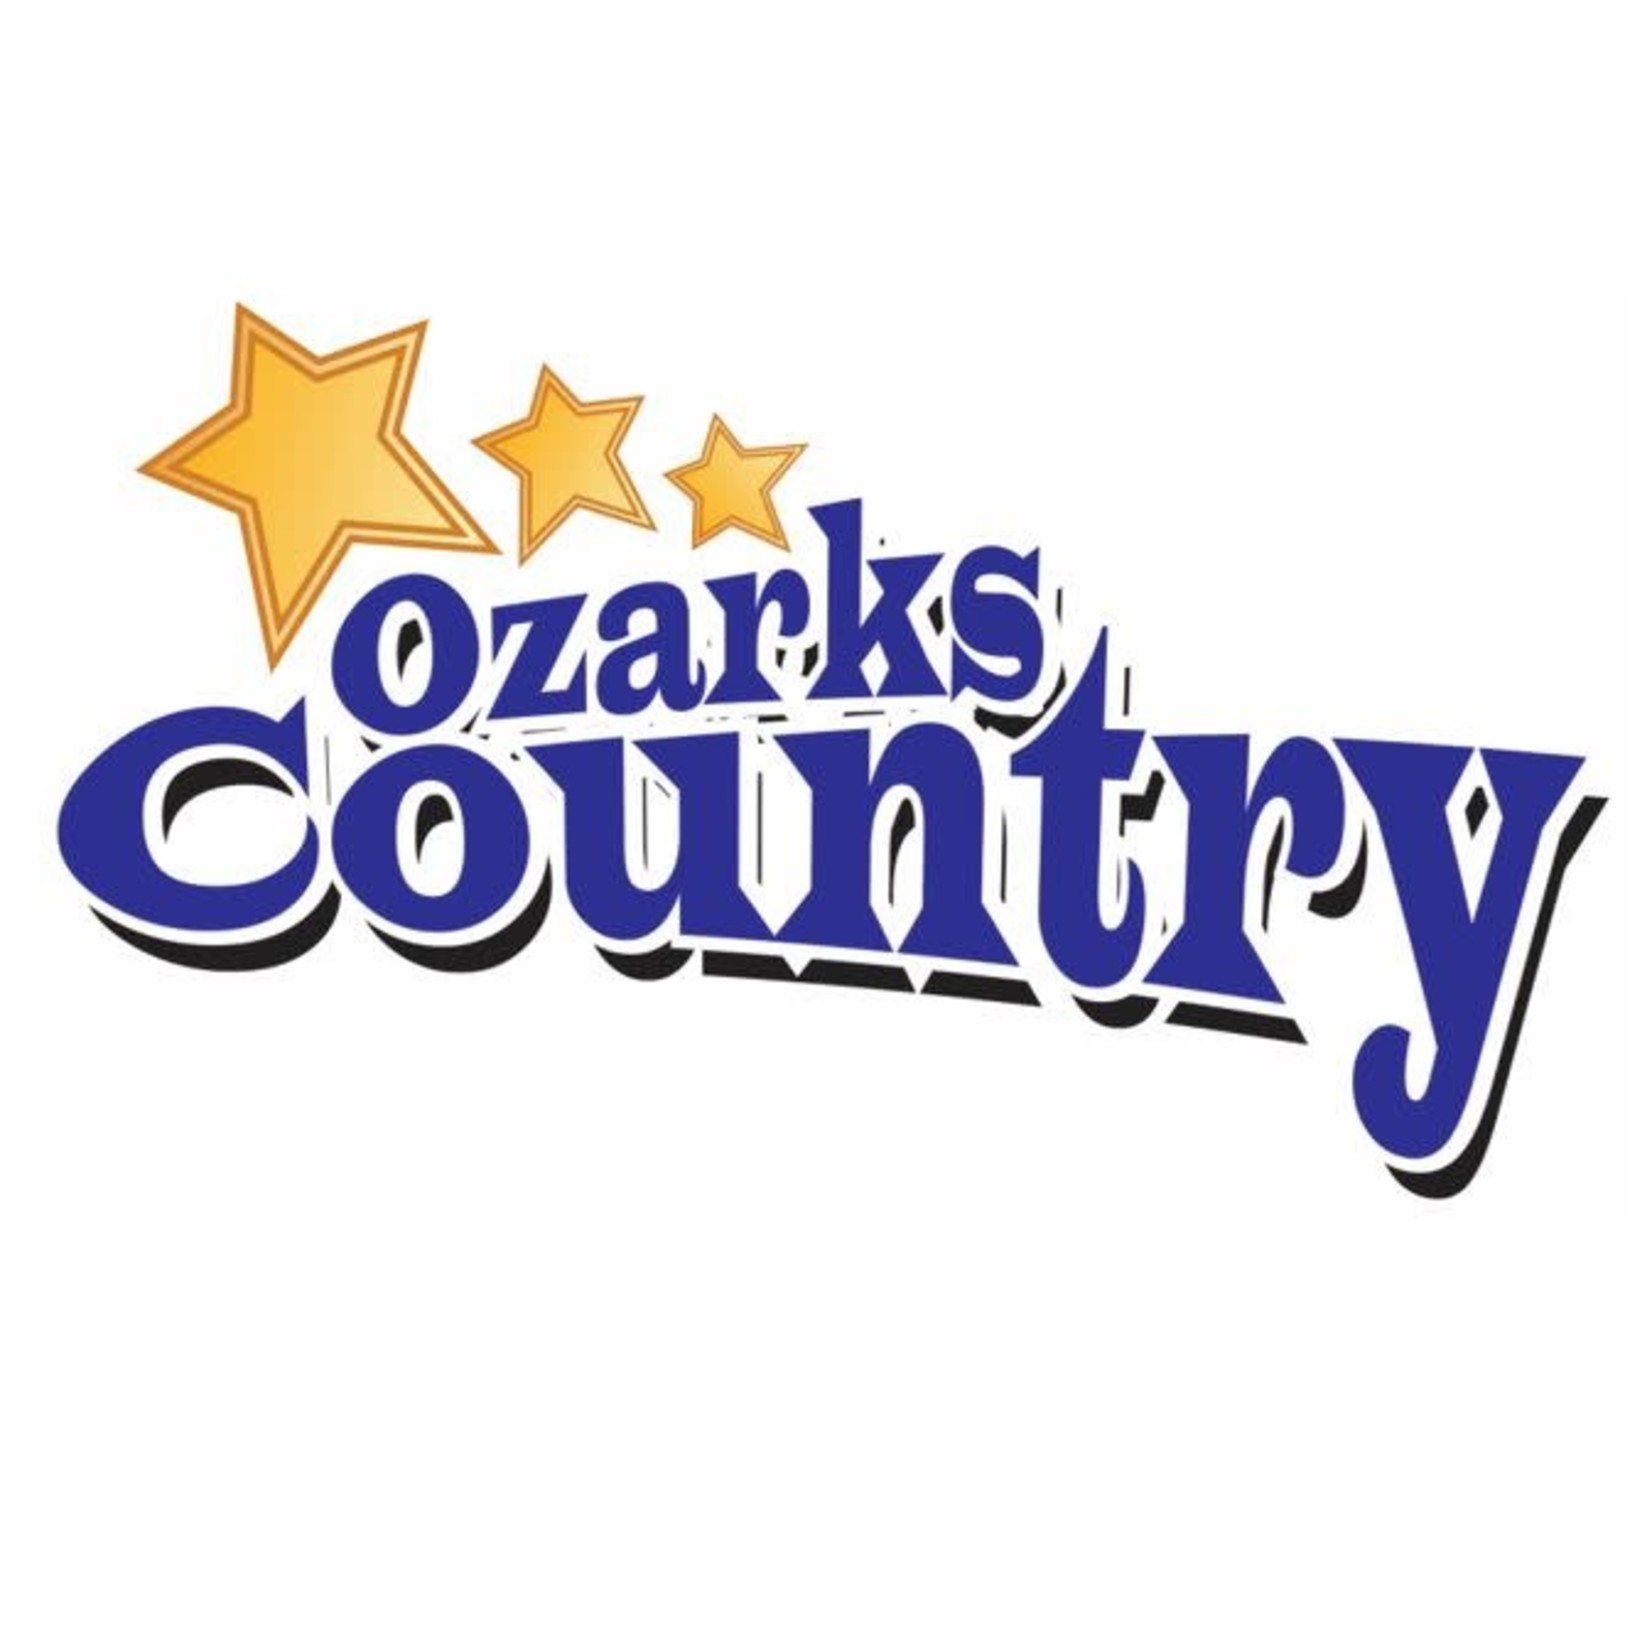 MO-Branson-Grand Country Music Hall Show MO-Branson-Grand Country Music Hall Show $95.10 Pair of Tickets to Ozarks Country Show